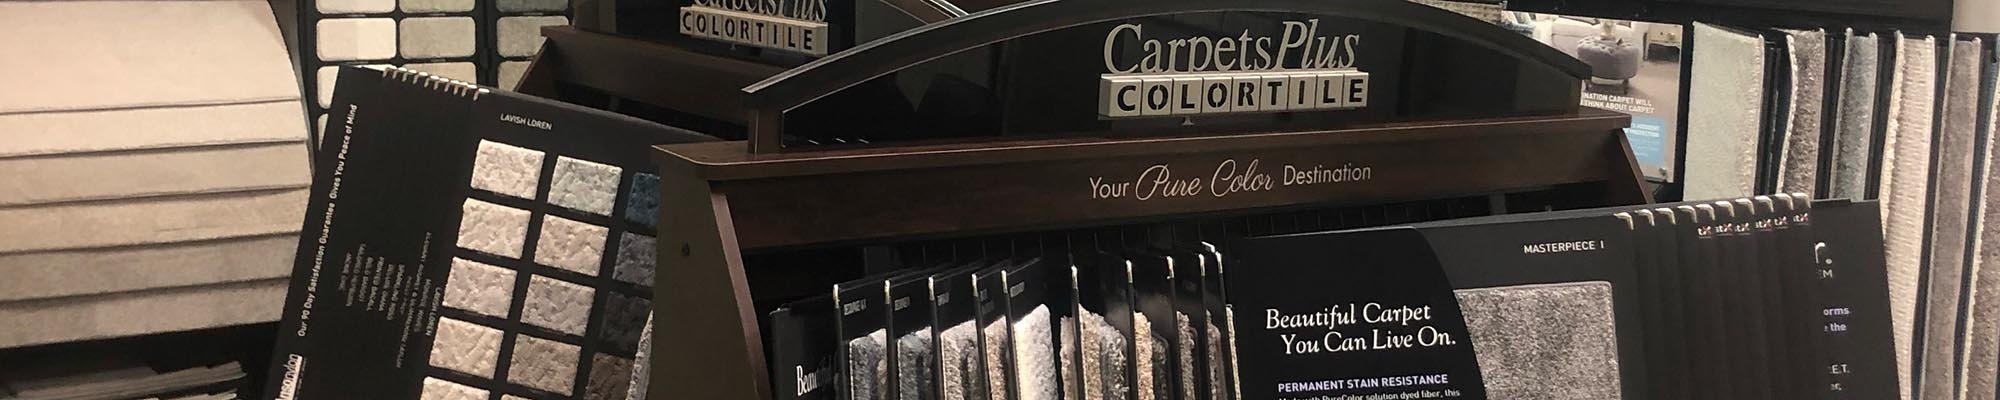 Local Flooring Retailer in Sun City West, AZ - Crown Carpet Colortile providing a wide selection of flooring and expert advice.